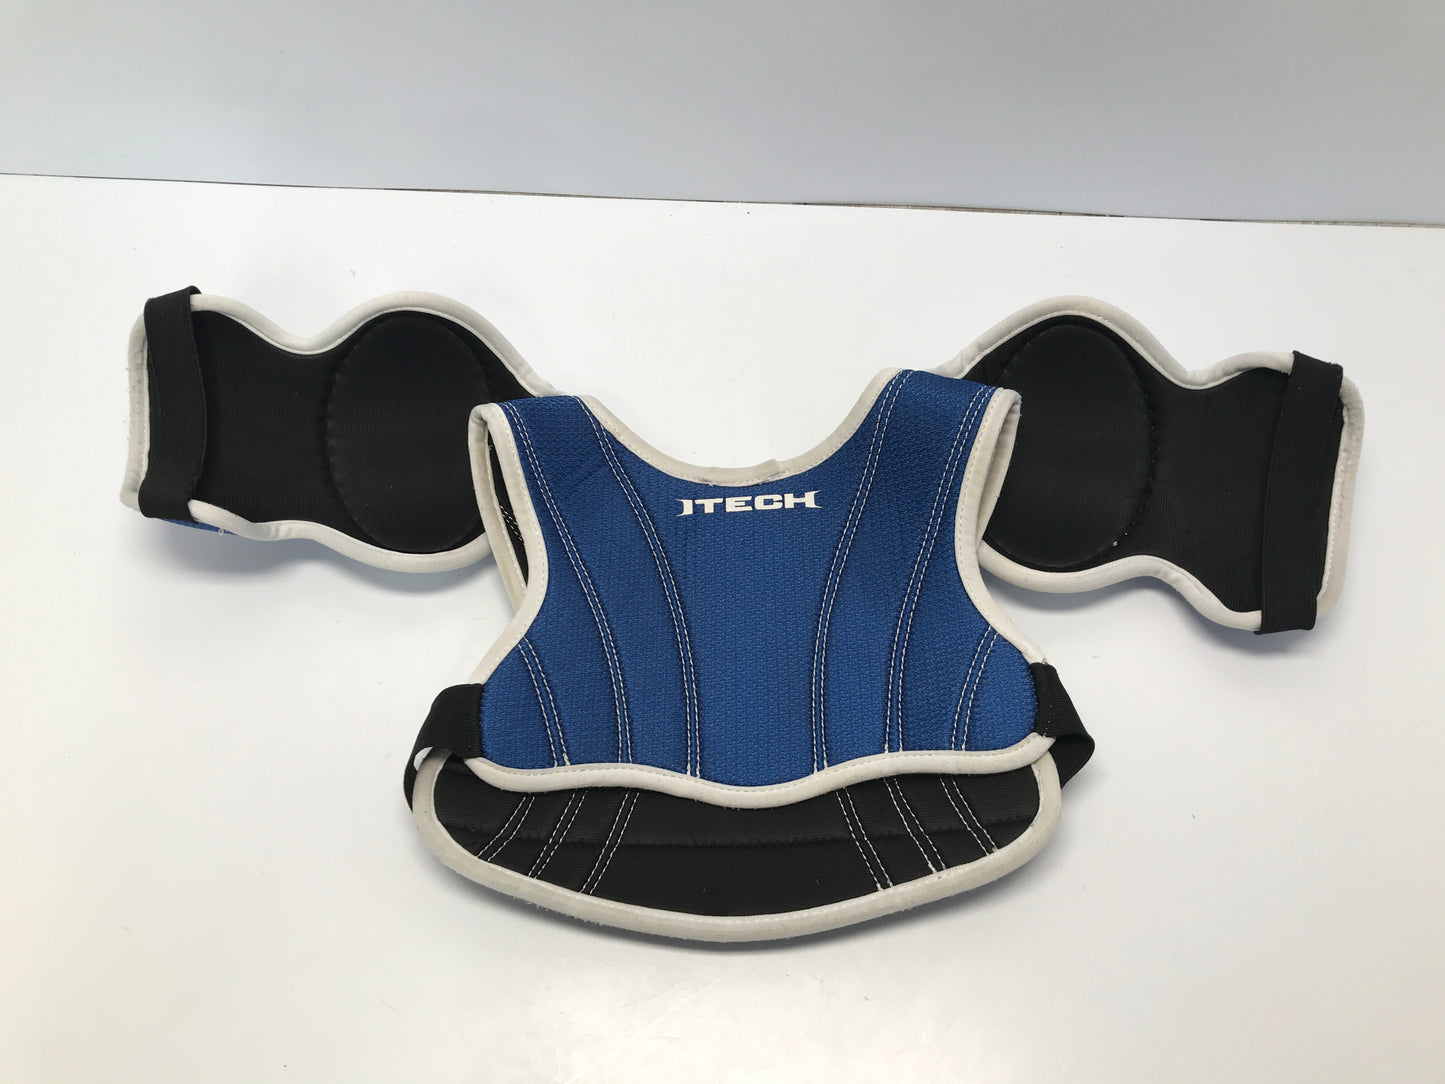 Hockey Shoulder Chest Pad Child Youth Size Large Age 5-6 Itech Blue White